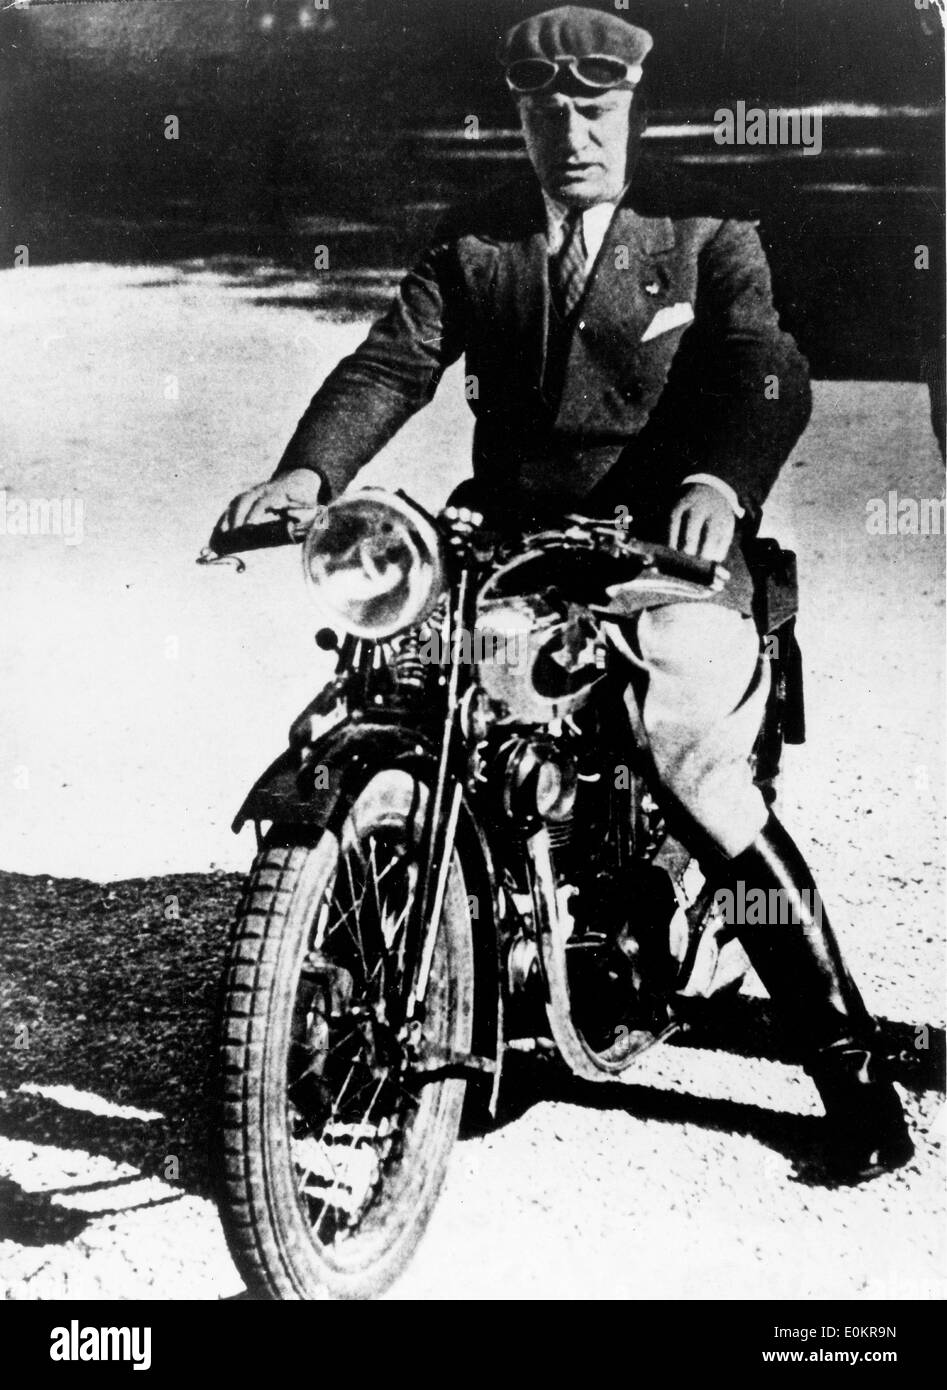 Dictator Benito Mussolini on a motorcycle Stock Photo